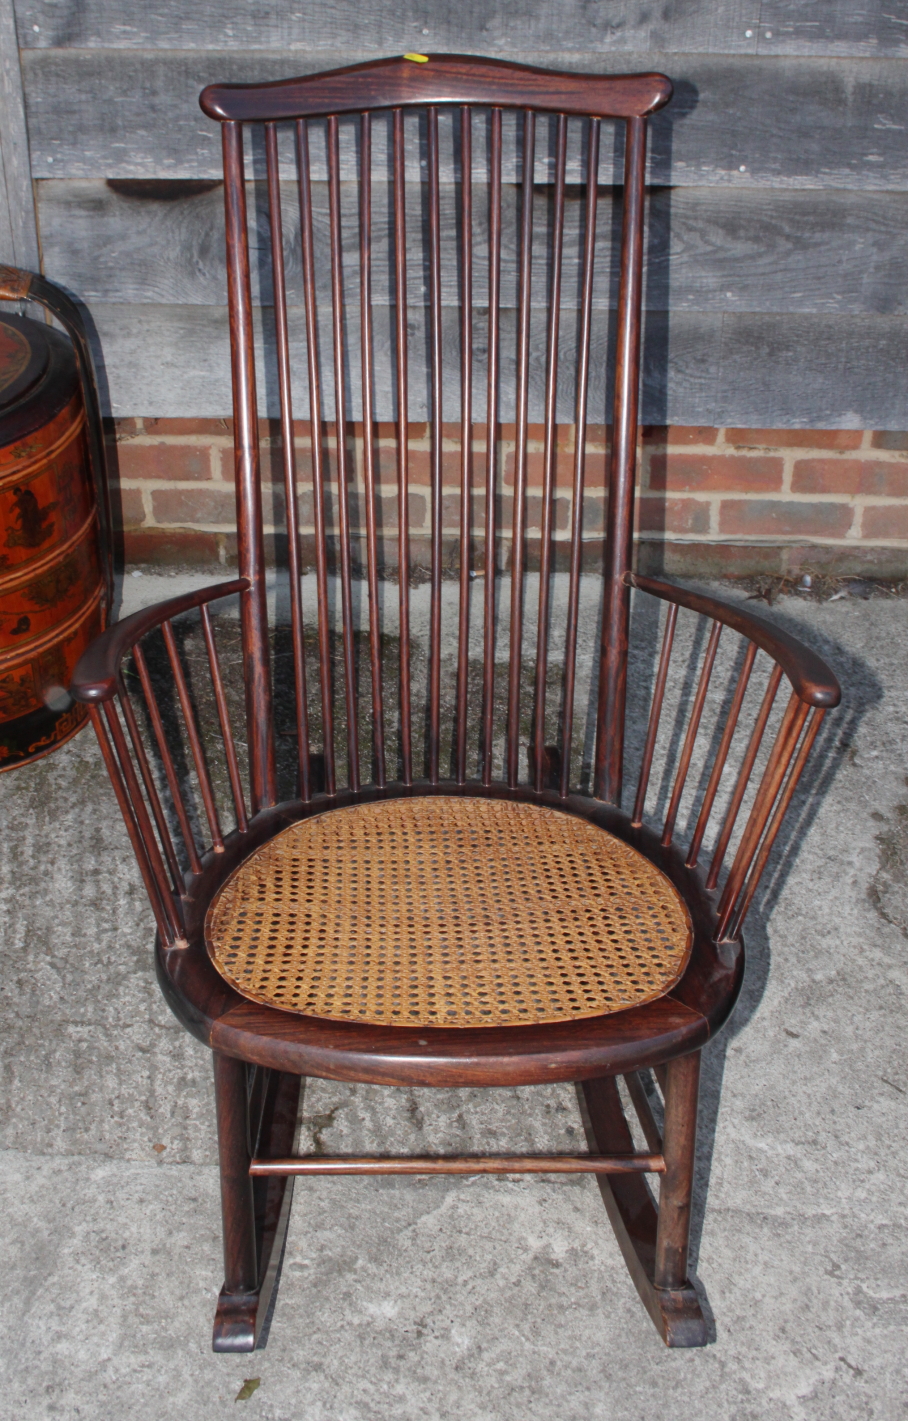 A tall spindle back rocking chair with caned seat panel